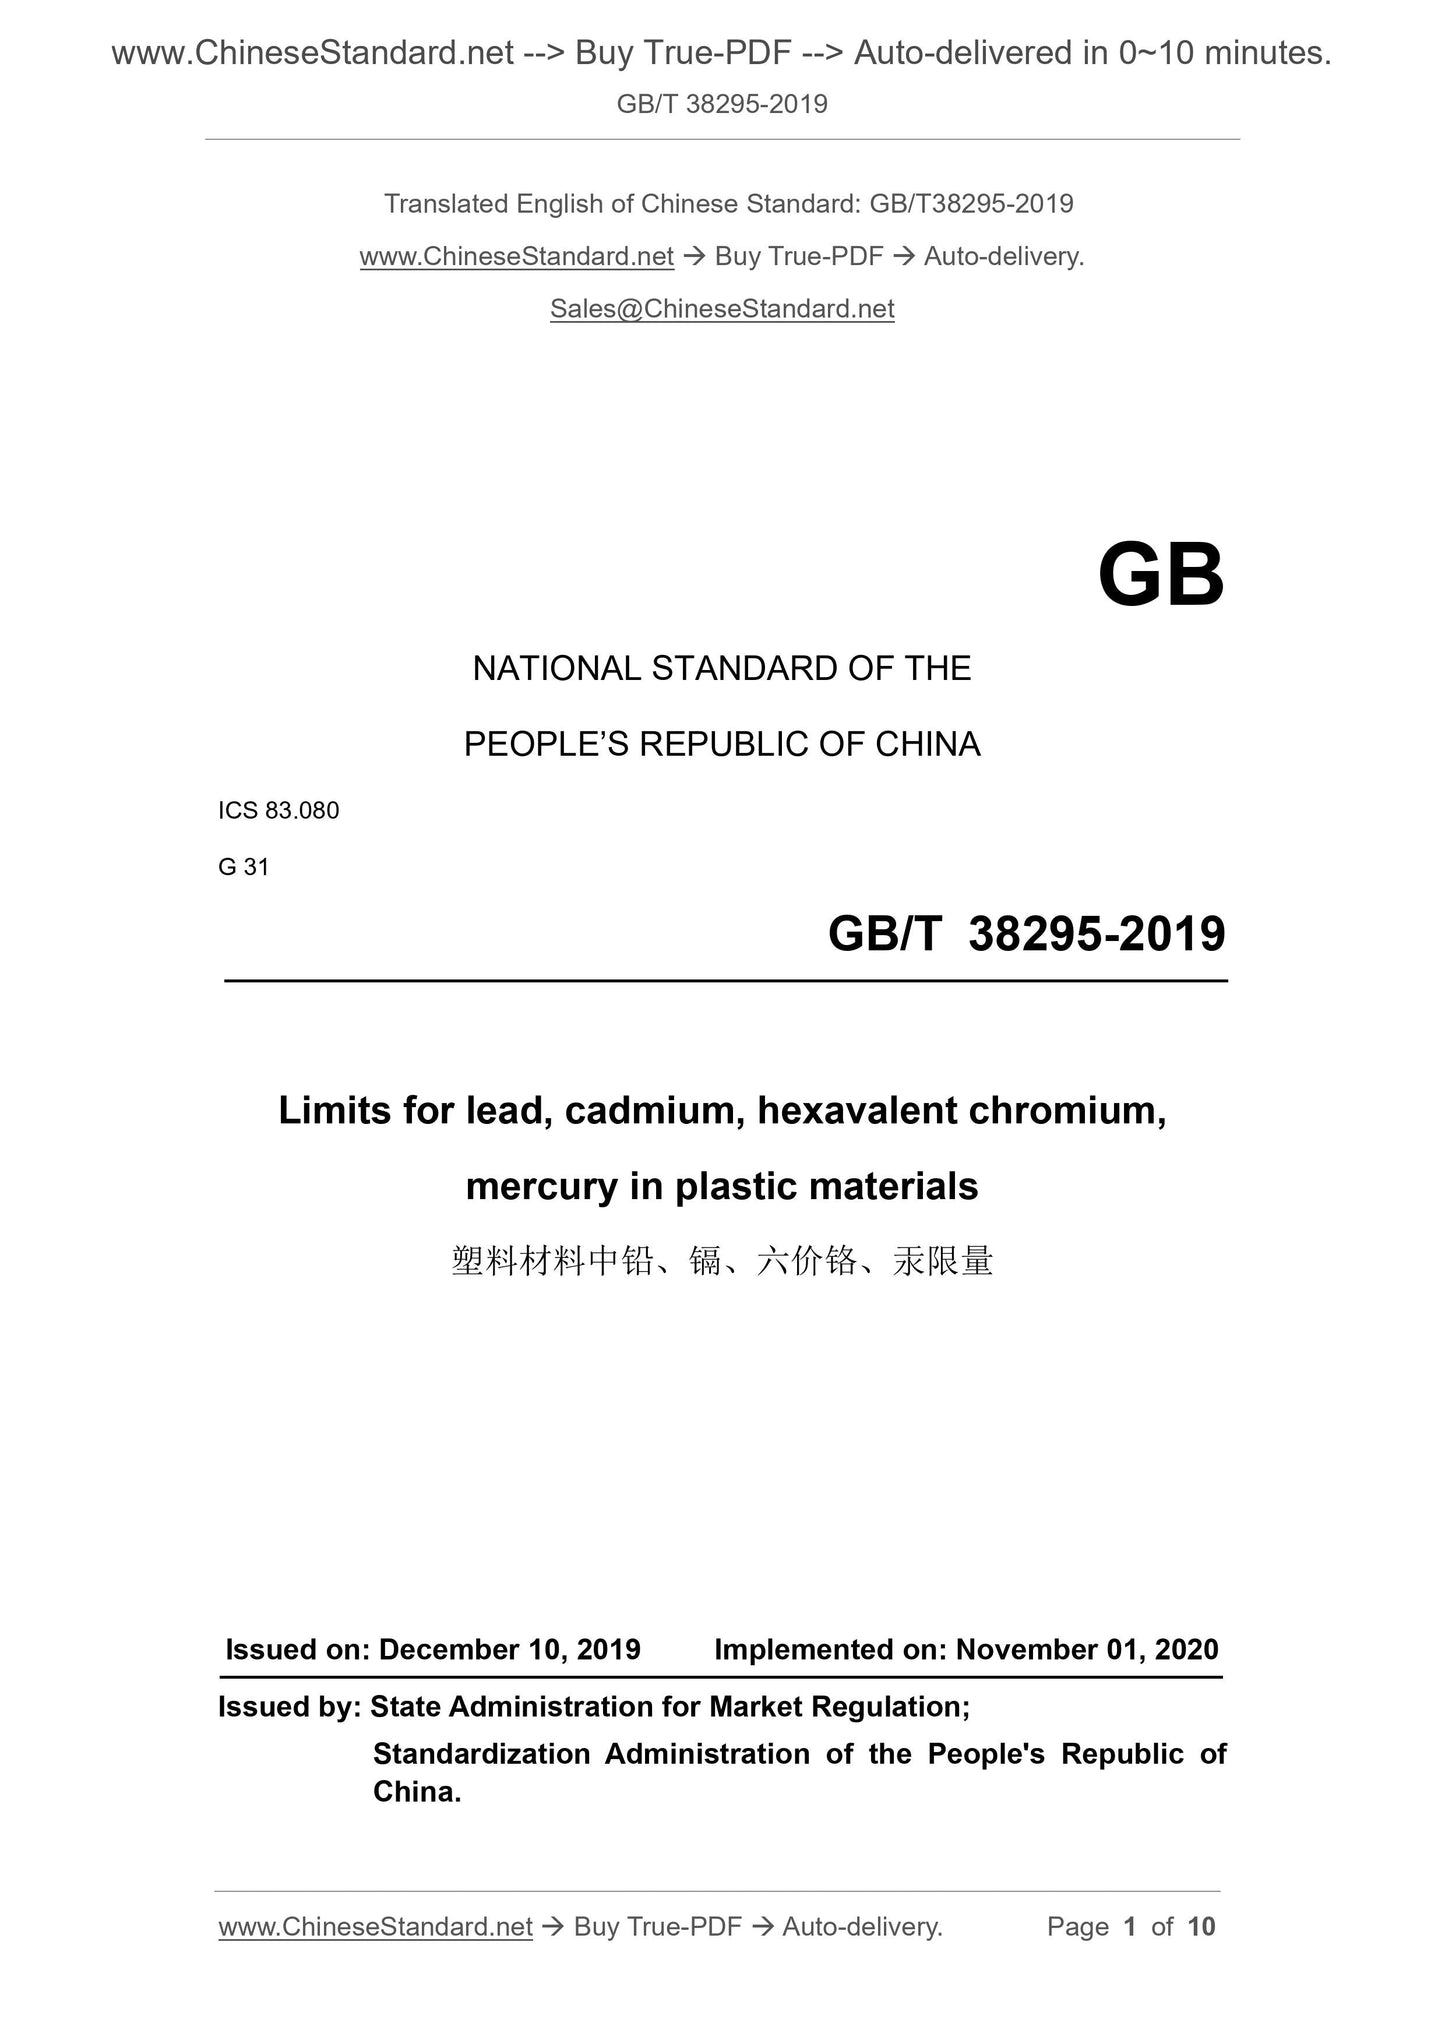 GB/T 38295-2019 Page 1